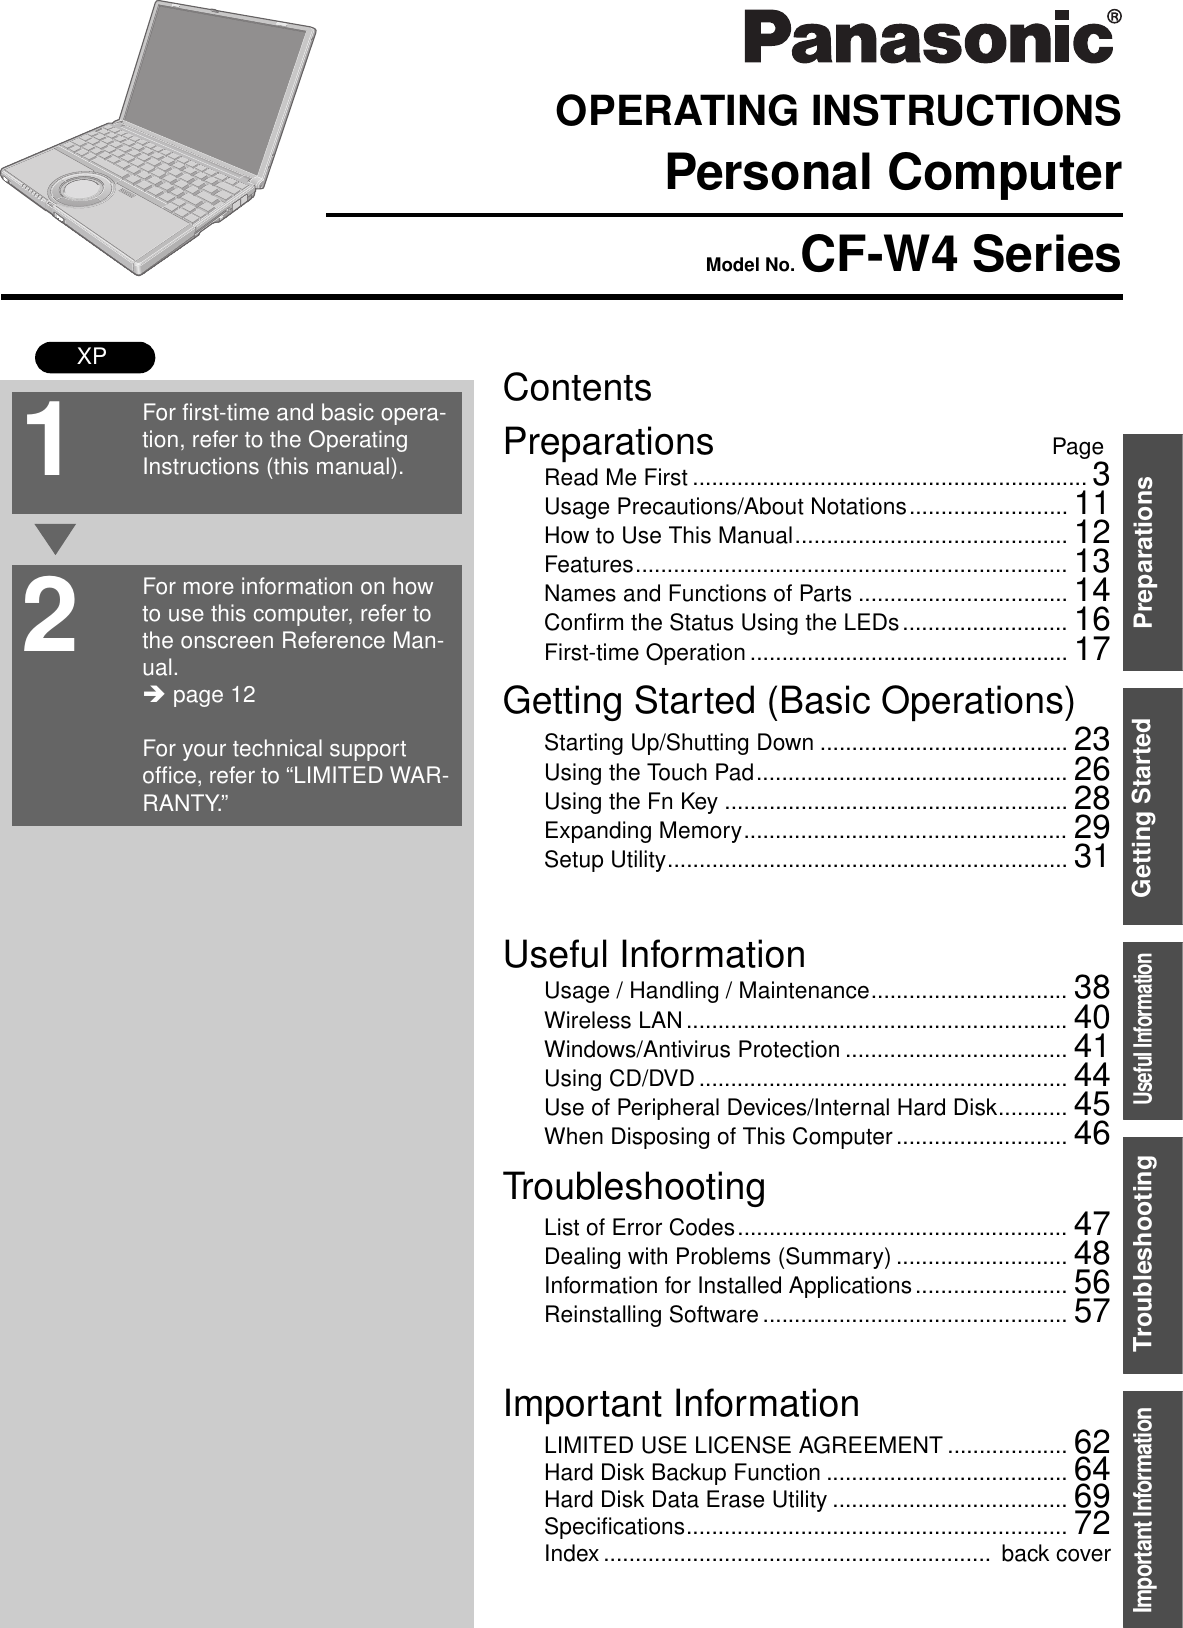 ContentsPreparations PageGetting Started (Basic Operations)TroubleshootingUseful InformationImportant InformationPreparationsGetting StartedUseful InformationTroubleshootingImportant InformationOPERATING INSTRUCTIONSPersonal ComputerModel No. CF-W4 SeriesXPRead Me First .............................................................. 3Usage Precautions/About Notations......................... 11How to Use This Manual........................................... 12Features.................................................................... 13Names and Functions of Parts ................................. 14Confirm the Status Using the LEDs.......................... 16First-time Operation .................................................. 17Starting Up/Shutting Down ....................................... 23Using the Touch Pad................................................. 26Using the Fn Key ...................................................... 28Expanding Memory................................................... 29Setup Utility............................................................... 31Usage / Handling / Maintenance............................... 38Wireless LAN ............................................................ 40Windows/Antivirus Protection ................................... 41Using CD/DVD .......................................................... 44Use of Peripheral Devices/Internal Hard Disk........... 45When Disposing of This Computer ........................... 46List of Error Codes.................................................... 47Dealing with Problems (Summary) ........................... 48Information for Installed Applications........................ 56Reinstalling Software ................................................ 57LIMITED USE LICENSE AGREEMENT ................... 62Hard Disk Backup Function ...................................... 64Hard Disk Data Erase Utility ..................................... 69Specifications............................................................ 72Index .............................................................  back coverFor first-time and basic opera-tion, refer to the Operating Instructions (this manual).For more information on how to use this computer, refer to the onscreen Reference Man-ual.Î page 12For your technical support office, refer to “LIMITED WAR-RANTY.”21